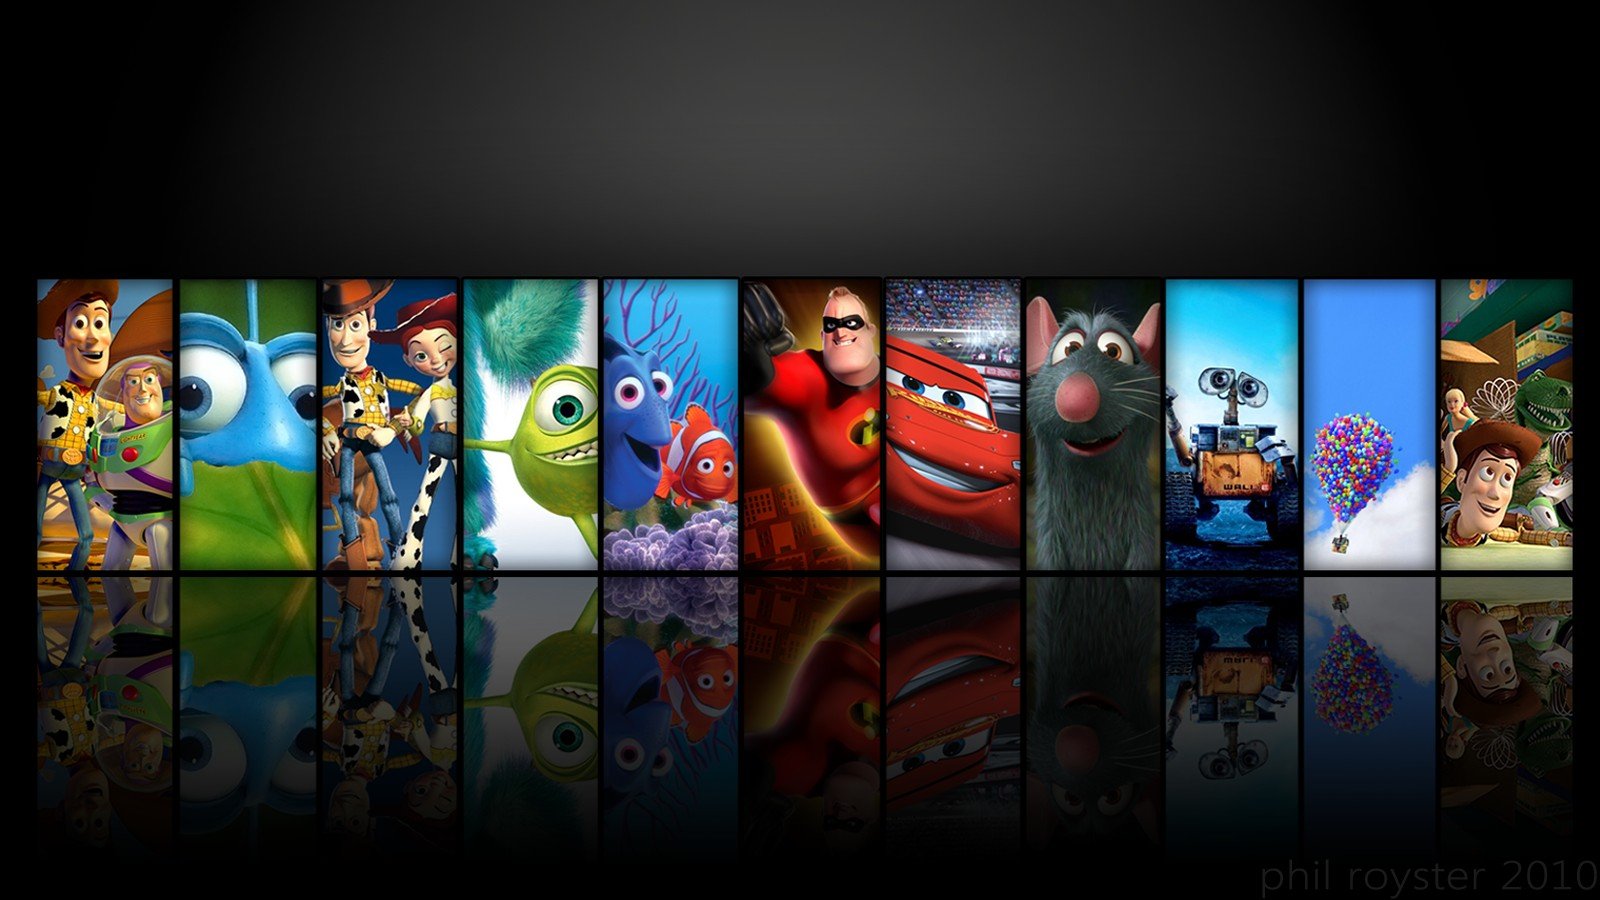 Pixar Animation Studios, Toy Story, A Bugs Life, Toy Story 2, Monsters, Inc., Ratatouille, WALL·E, Toy Story 3, Finding Nemo, Reflection Wallpaper